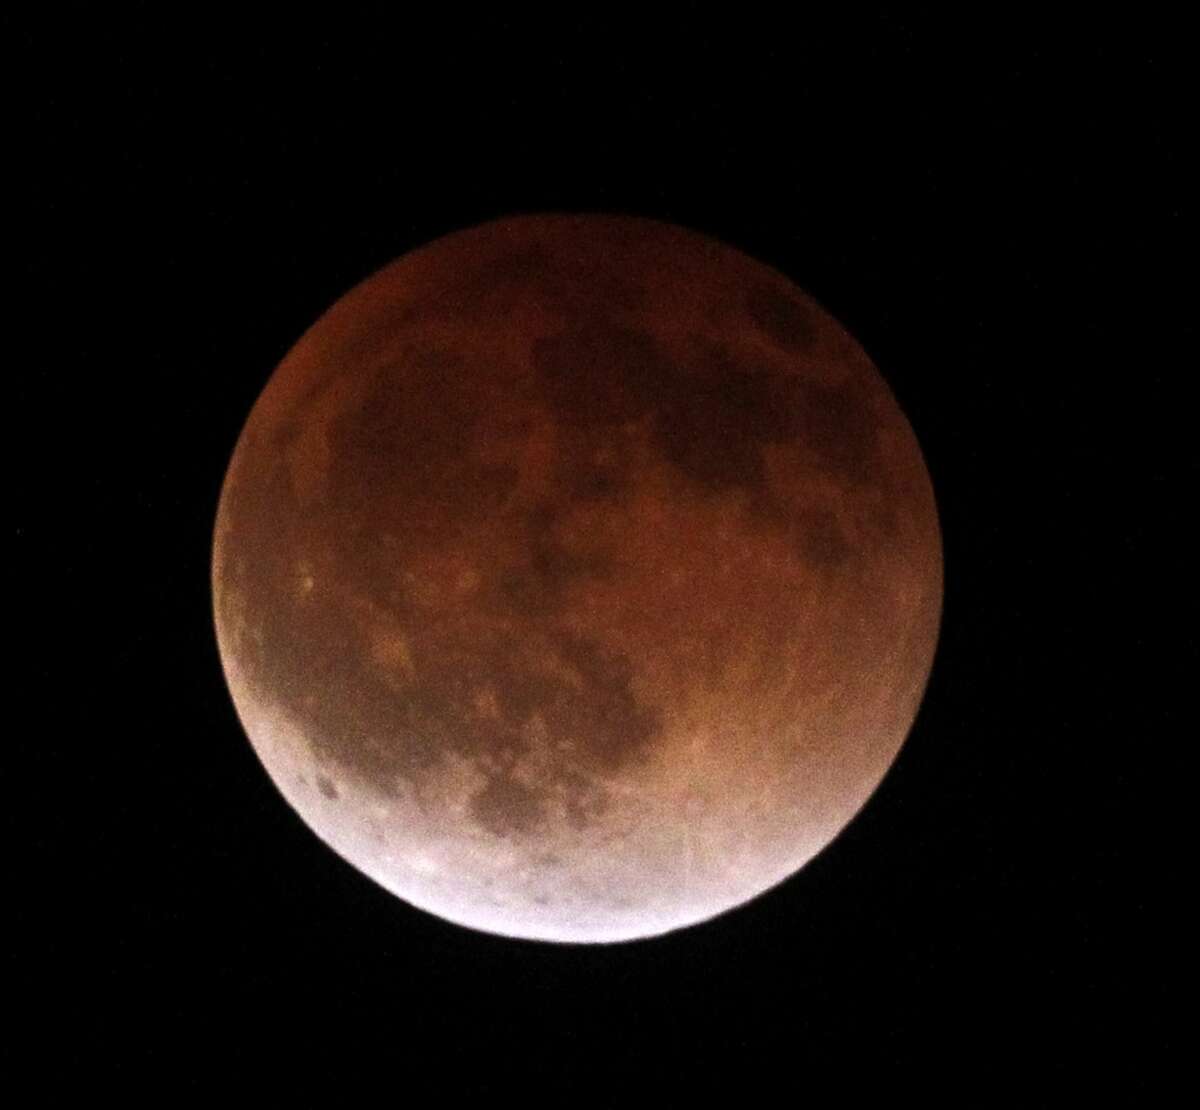 The moon completely crosses the earth's shadow in a total lunar eclipse, becoming a "blood moon" because of sunlight bending through Earth's atmosphere and hitting the moon.